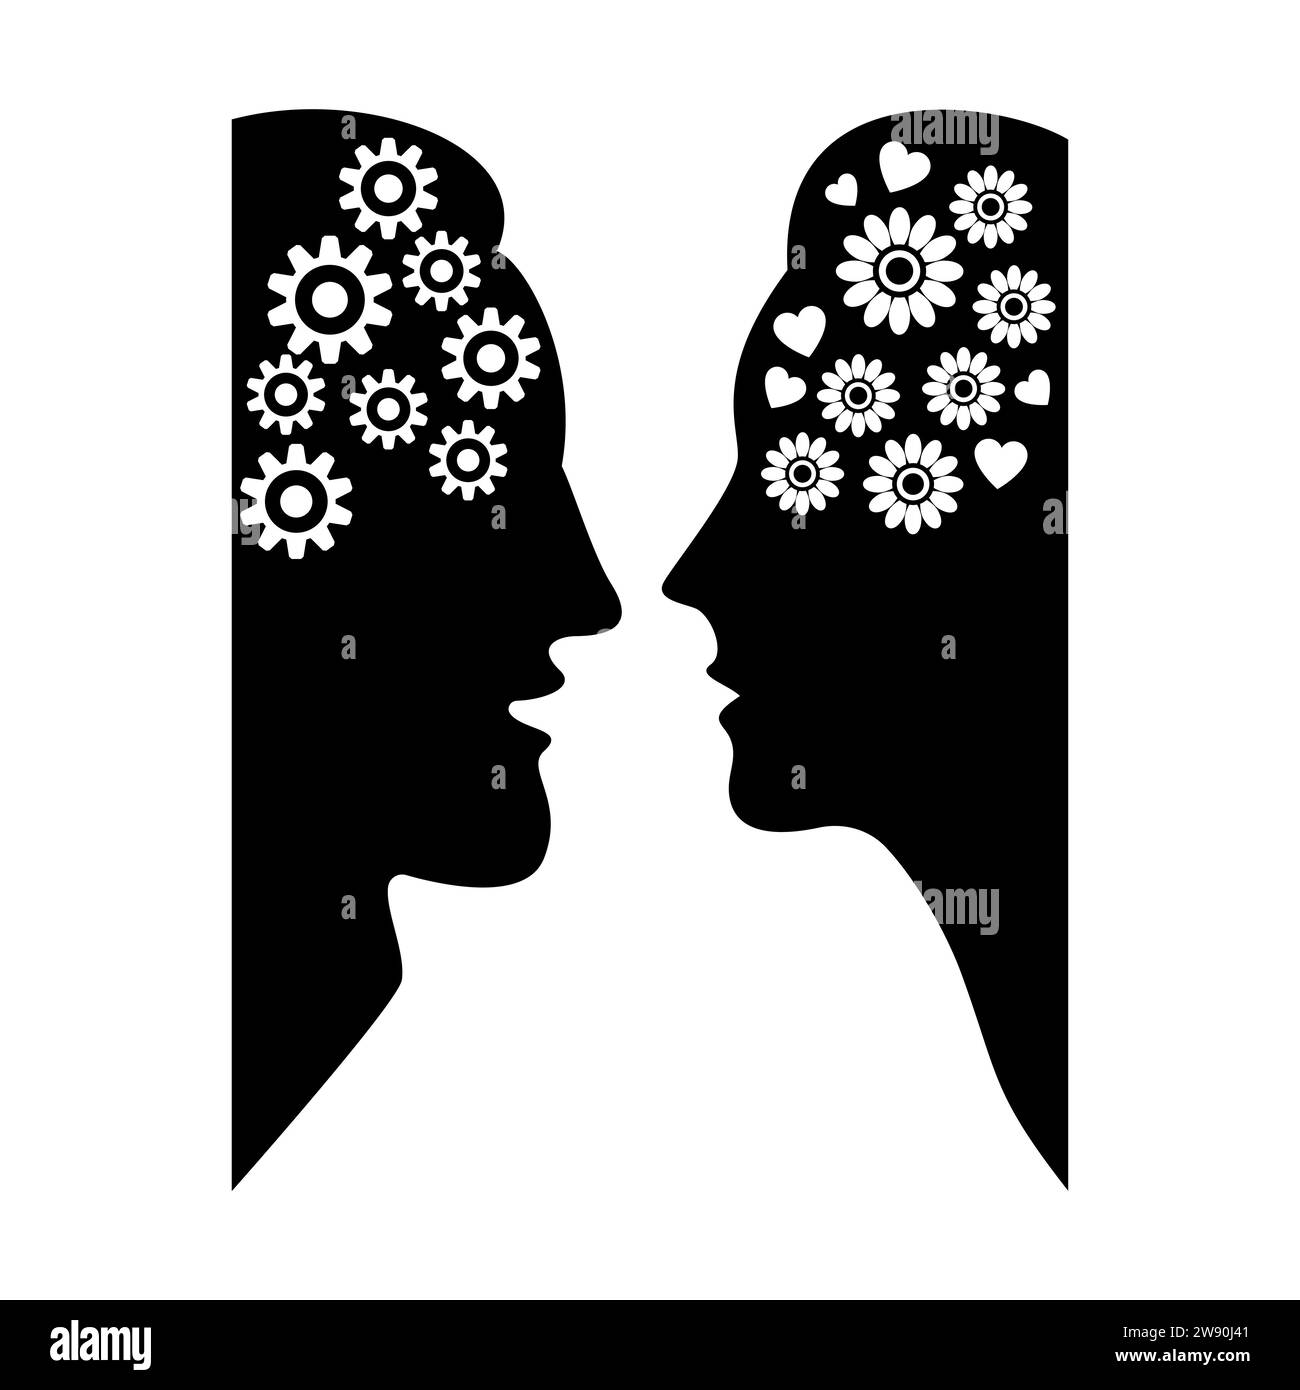 Man with gears and woman with flowers and hearts in heads. The concept of different thinking between a man and a woman. Black silhouettes of faces. Stock Vector